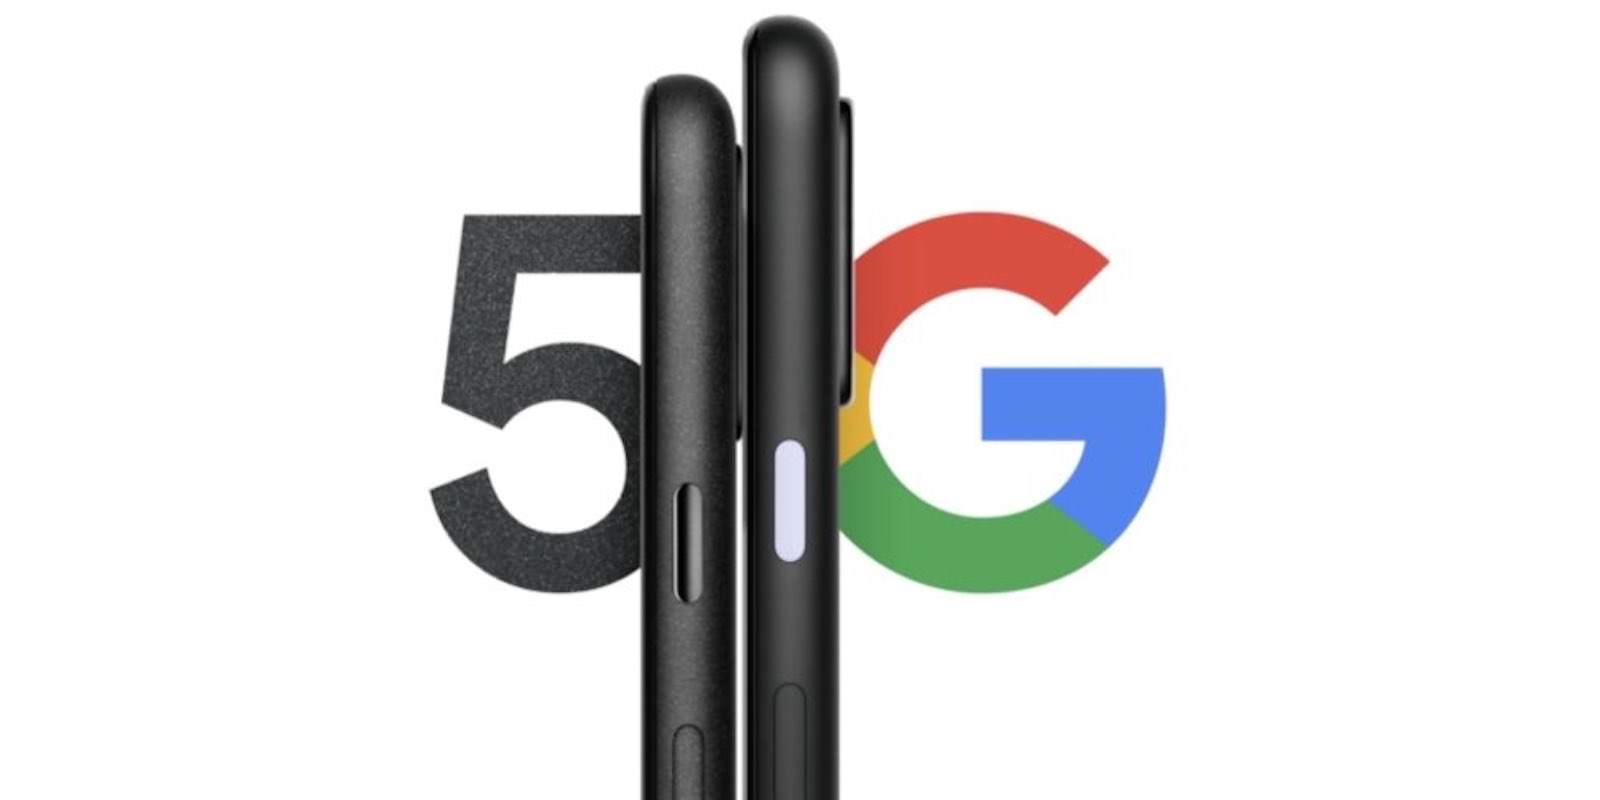 Pixel4a 5g and pixel5 5g